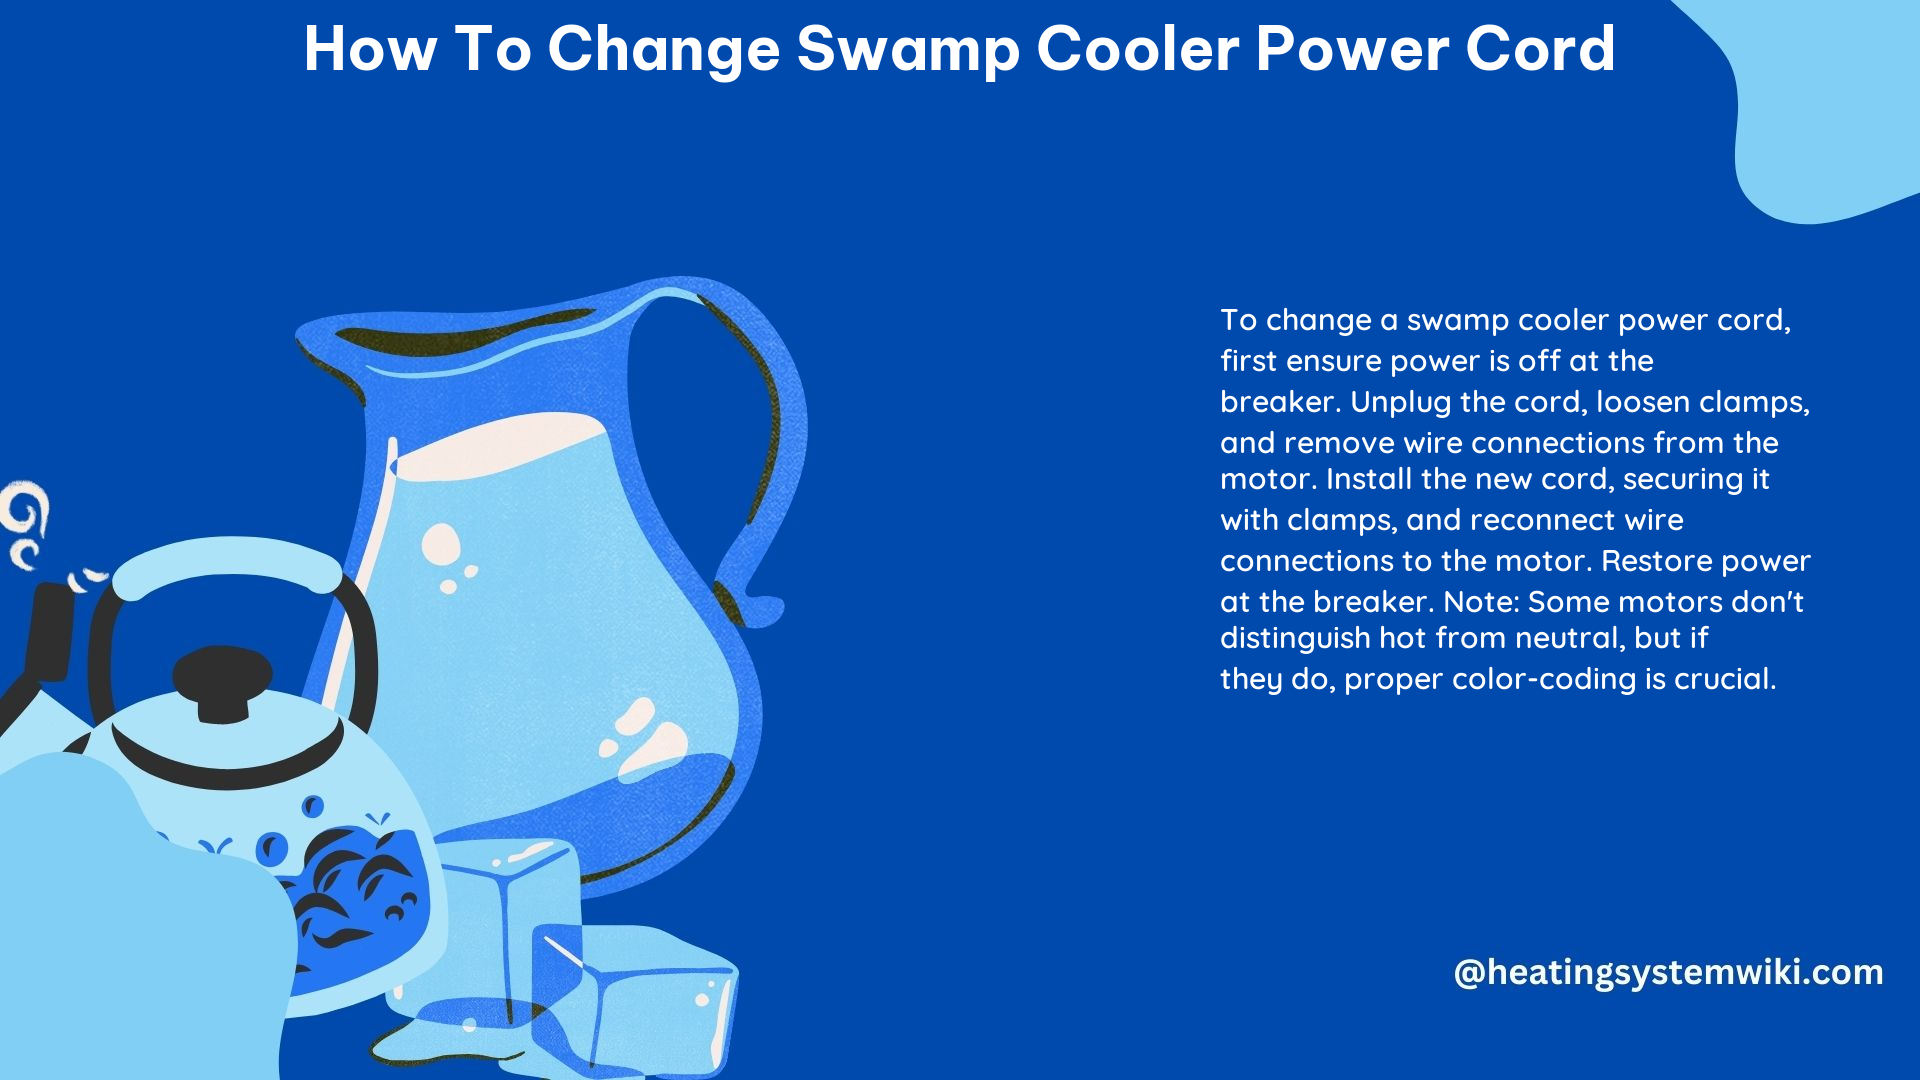 How to Change Swamp Cooler Power Cord